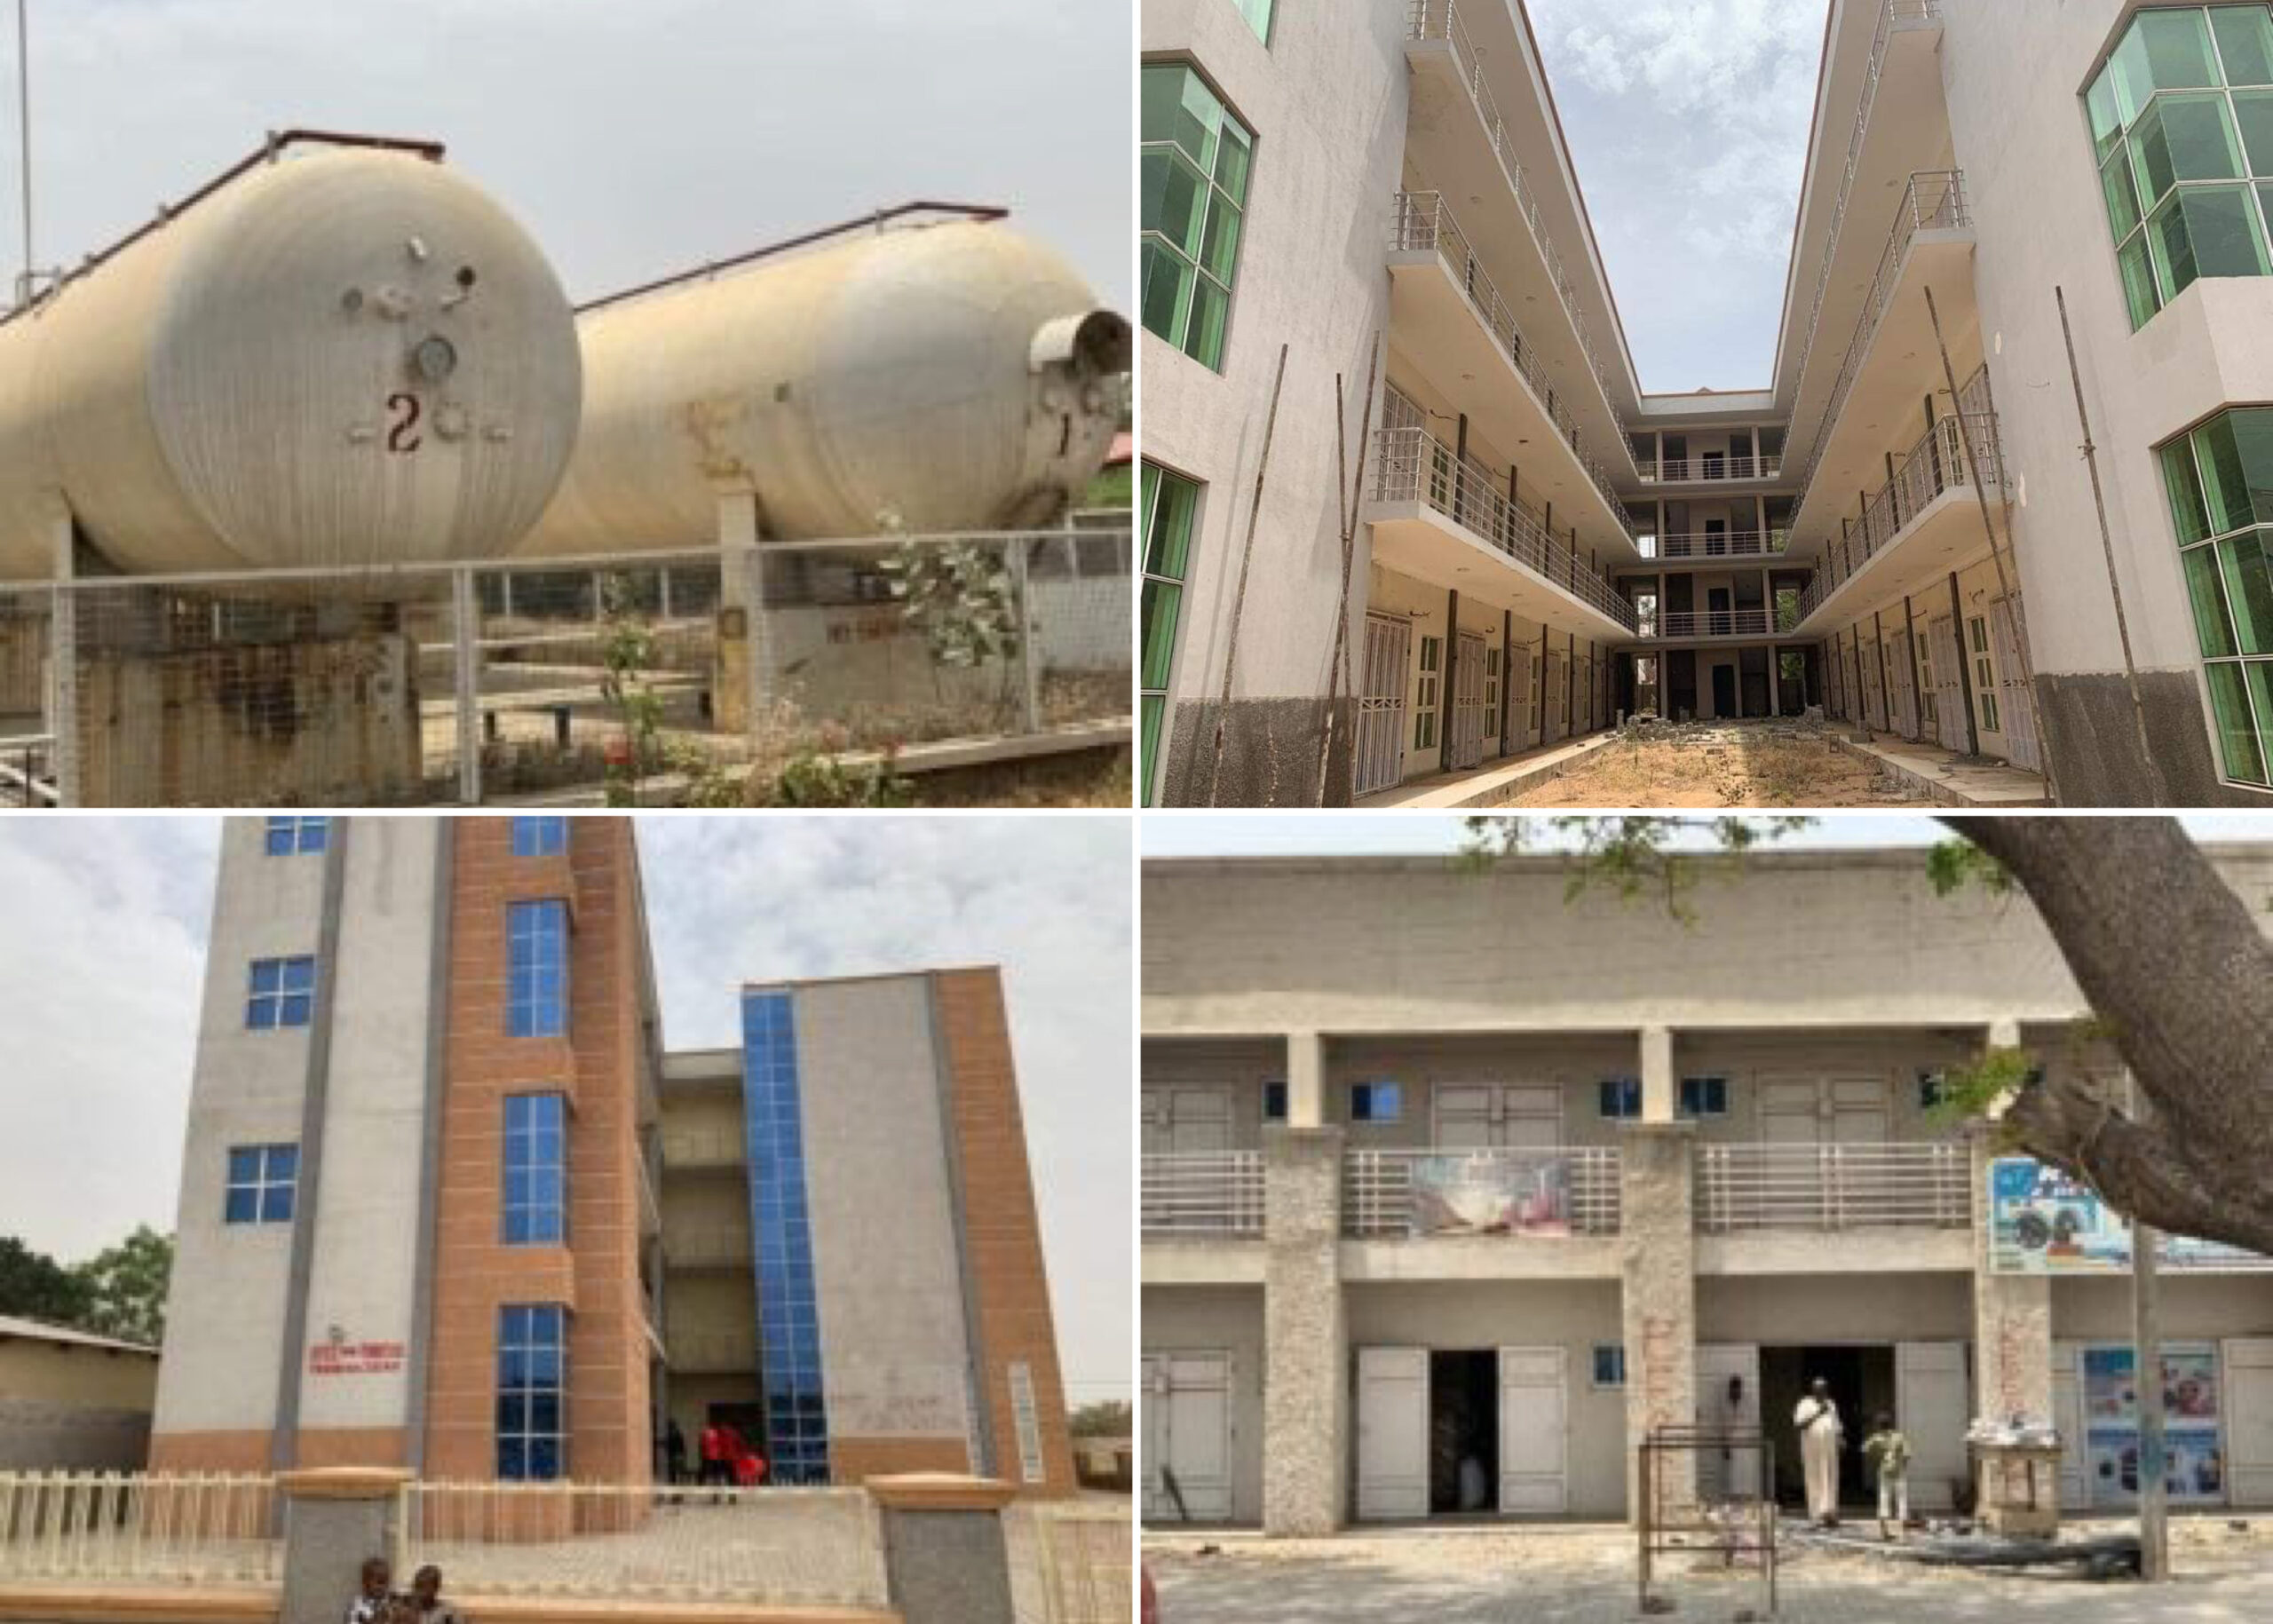 EFCC Releases Full List, Photos Of N10.9bn Properties Seized From Top Military Officer